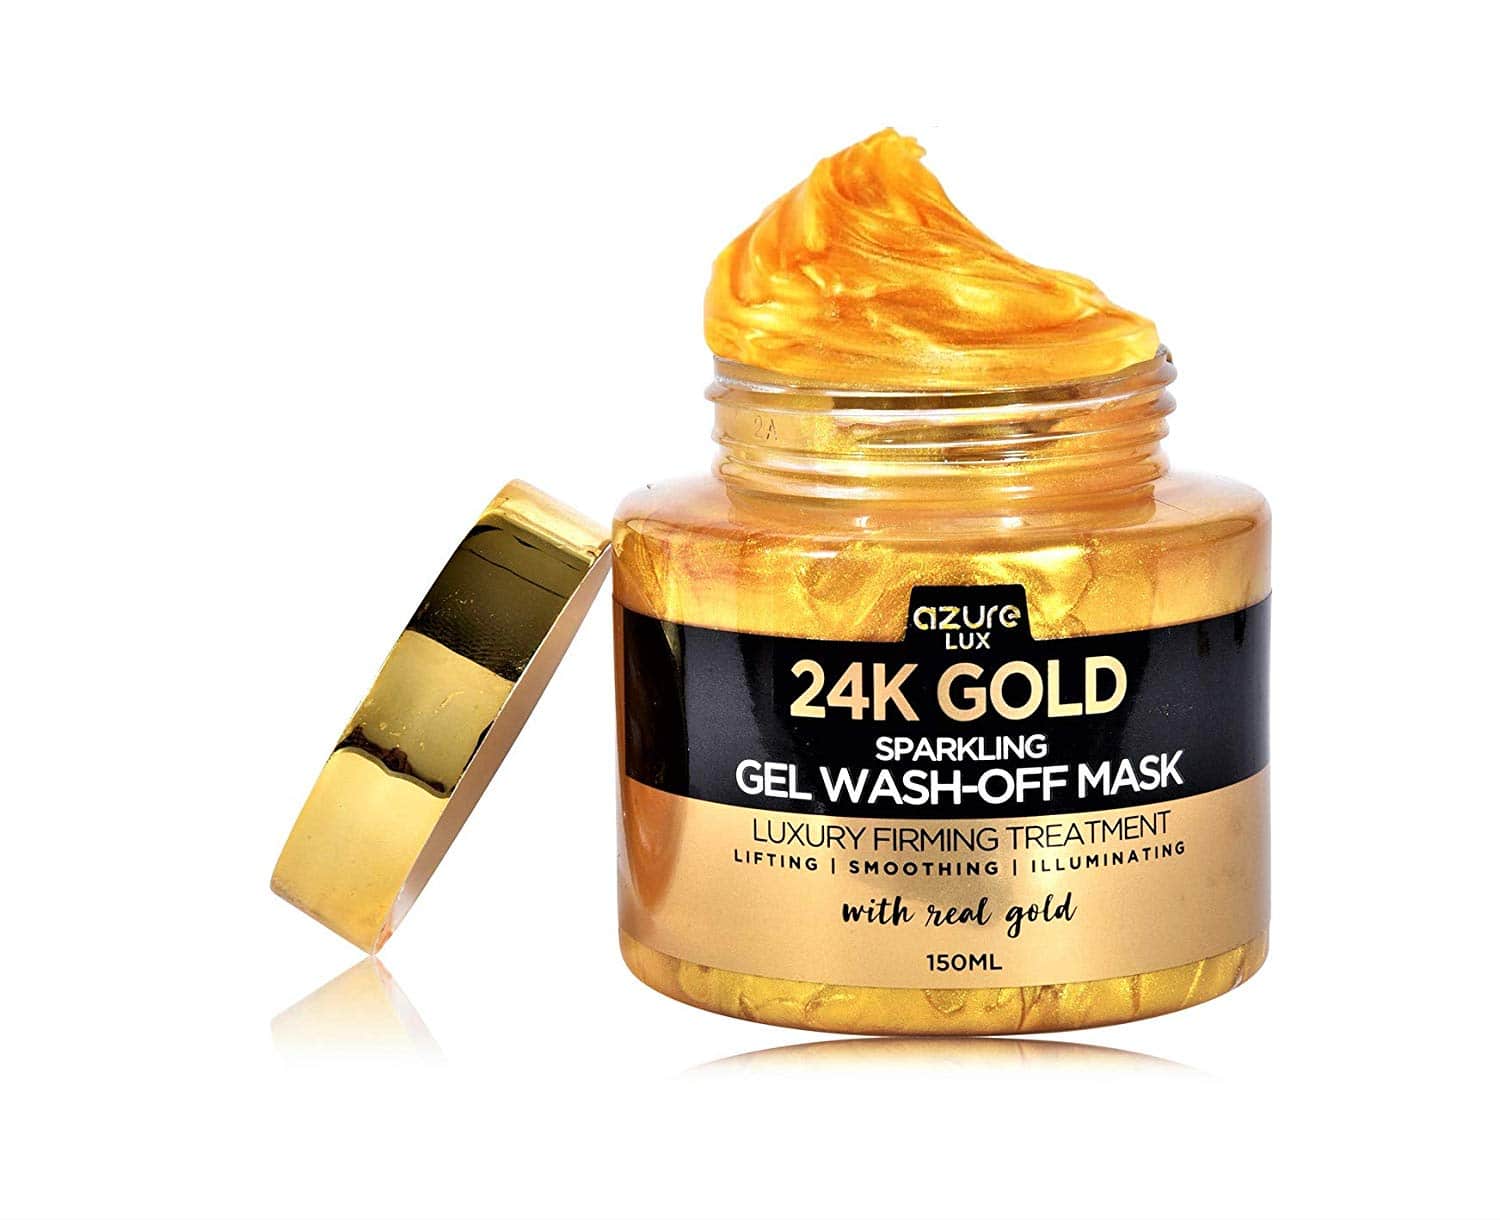 gold infused skincare, skincare with gold, gold skincare